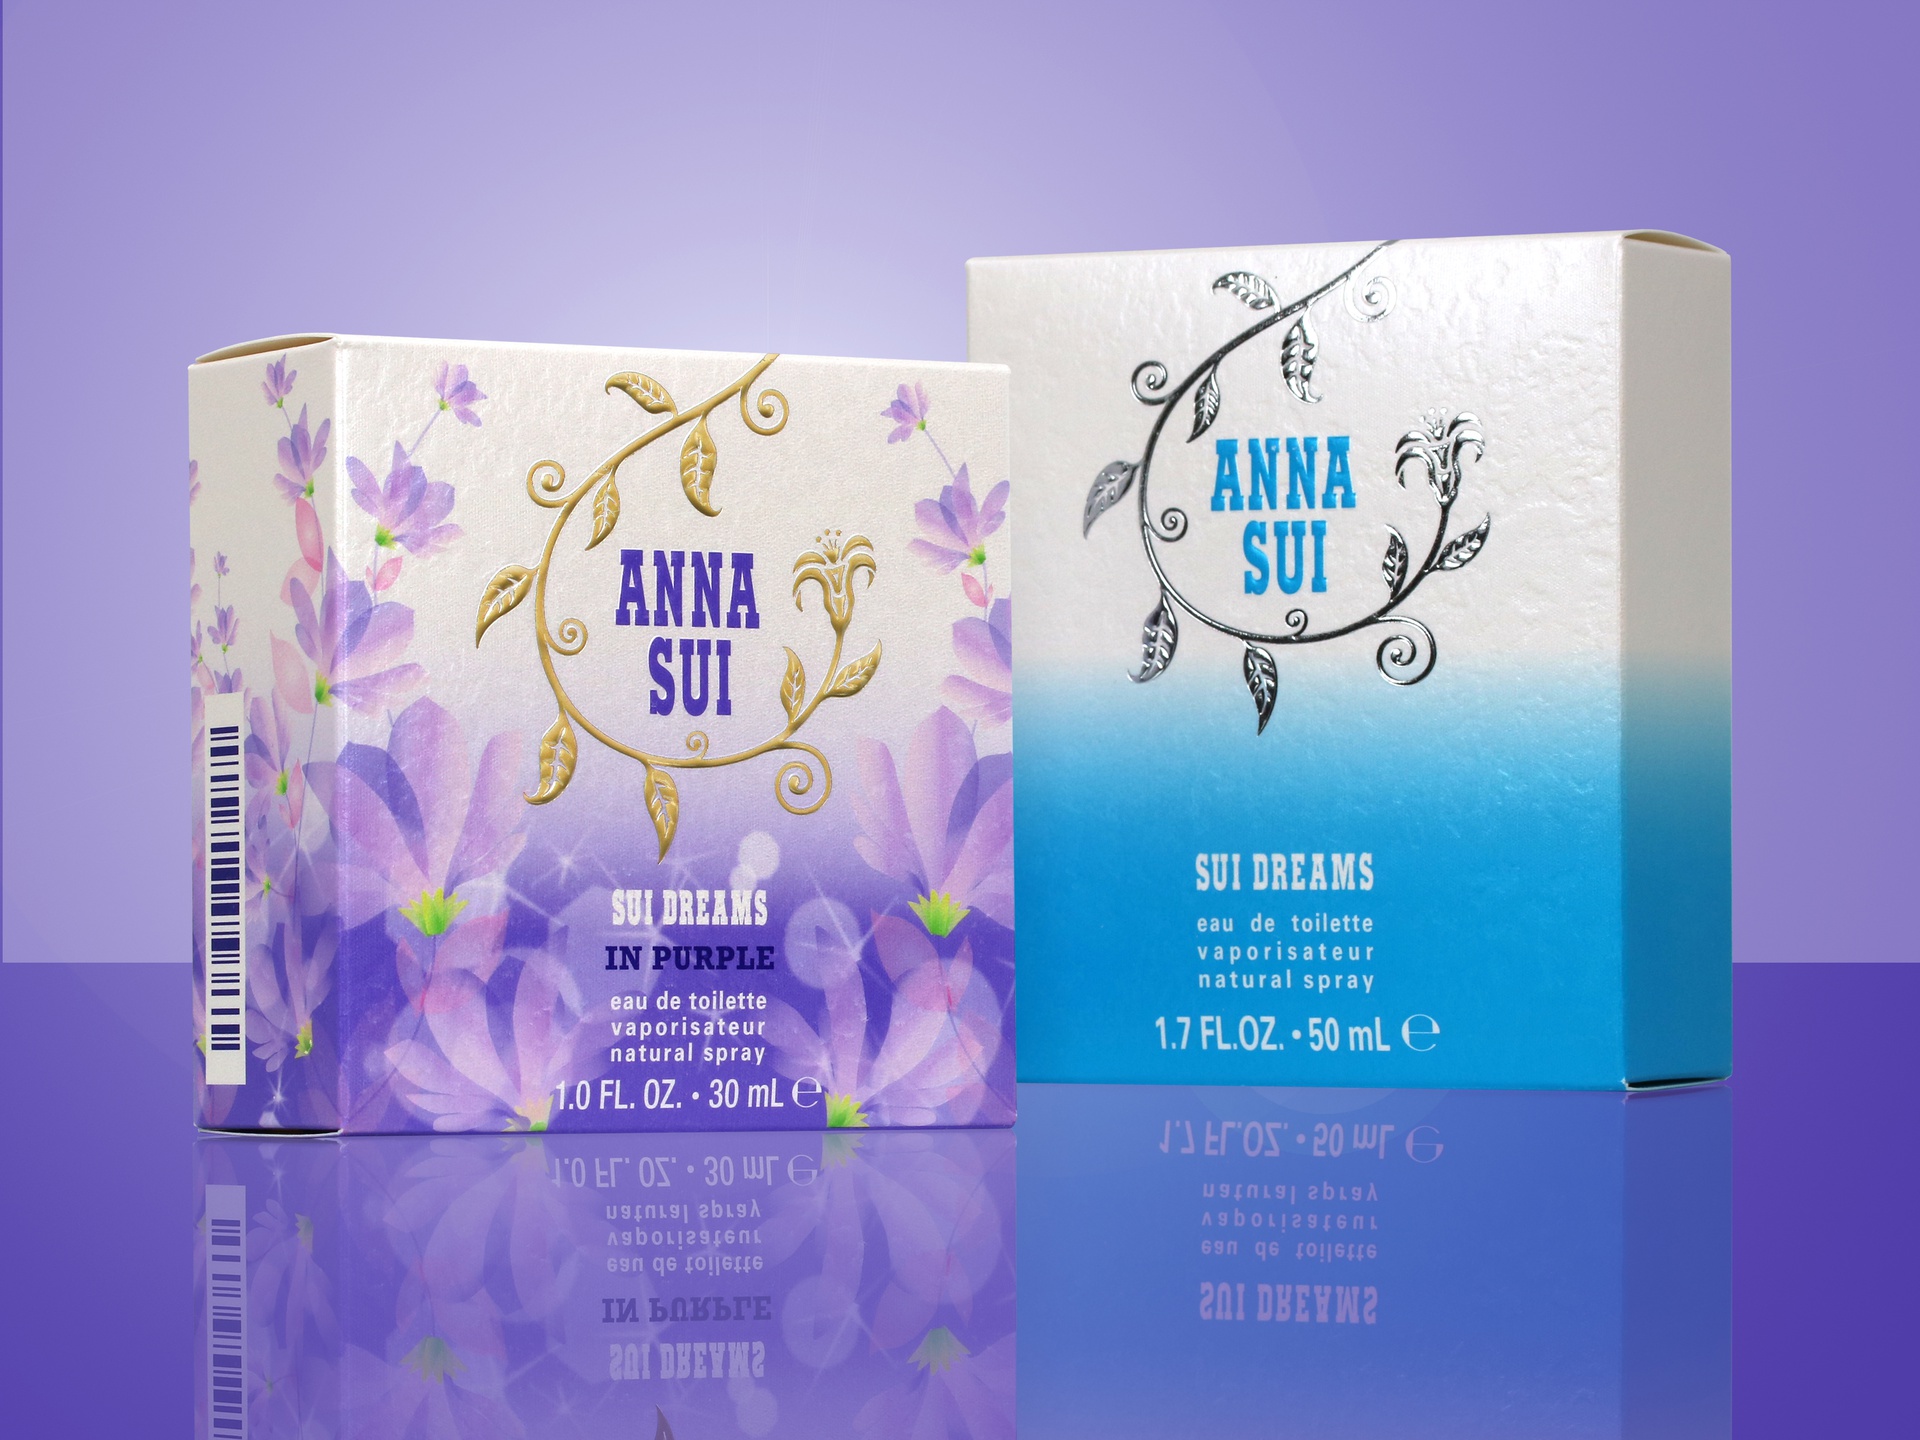 Sui Dreams in Purple by Anna Sui packaging